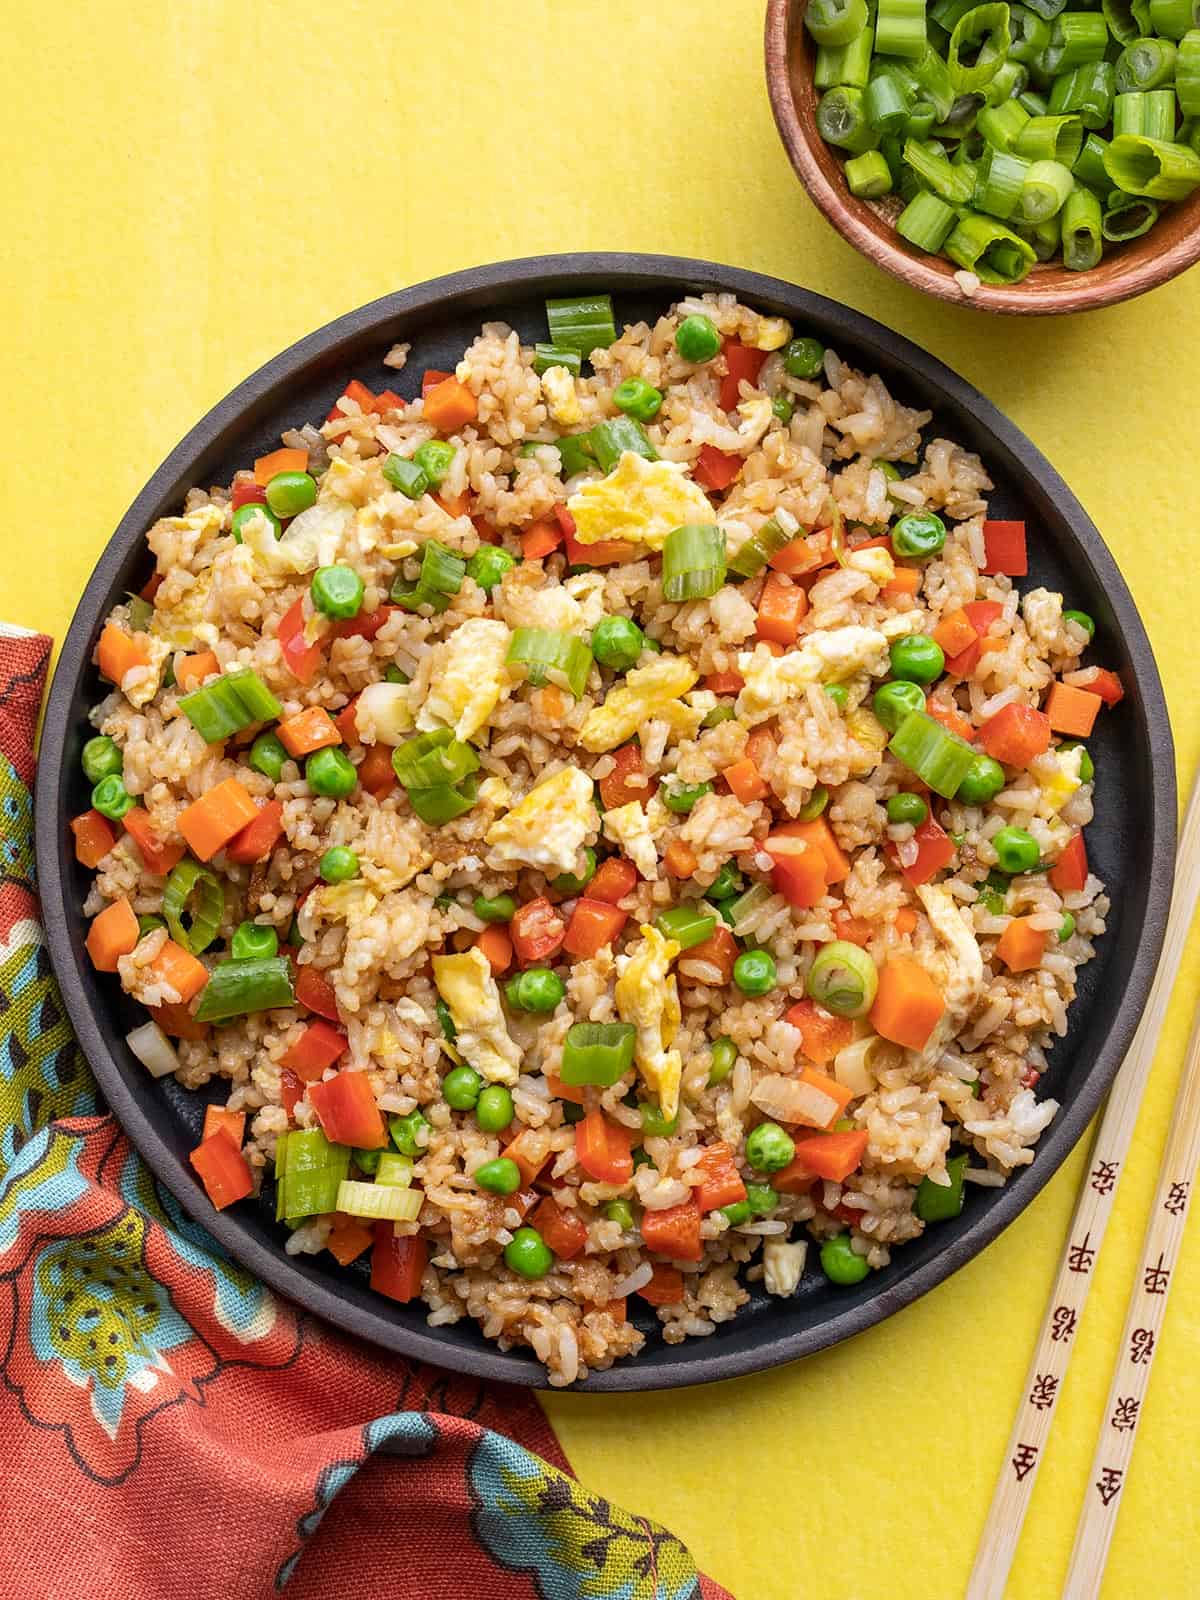 house fried rice nutrition